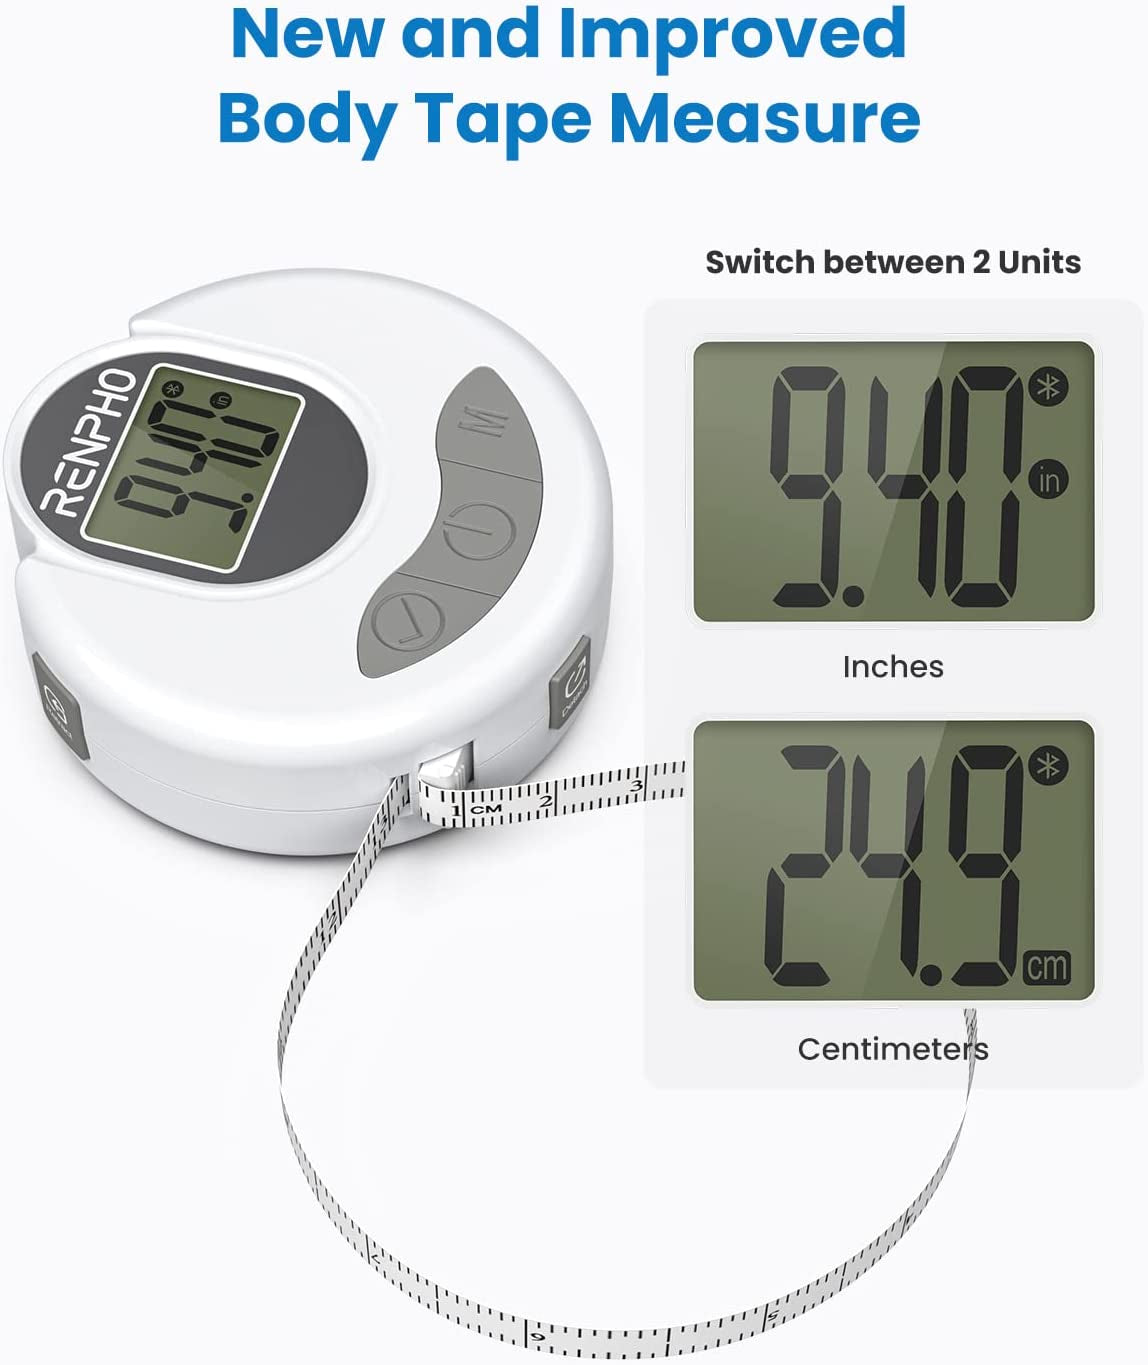 Tape Measure for Body, Smart Bluetooth Digital Body Measuring Tape for Weight Loss, Body Fat Monitor, Muscle Gain, Fitness Bodybuilding, Retractable, Measures Body Part Circumferences